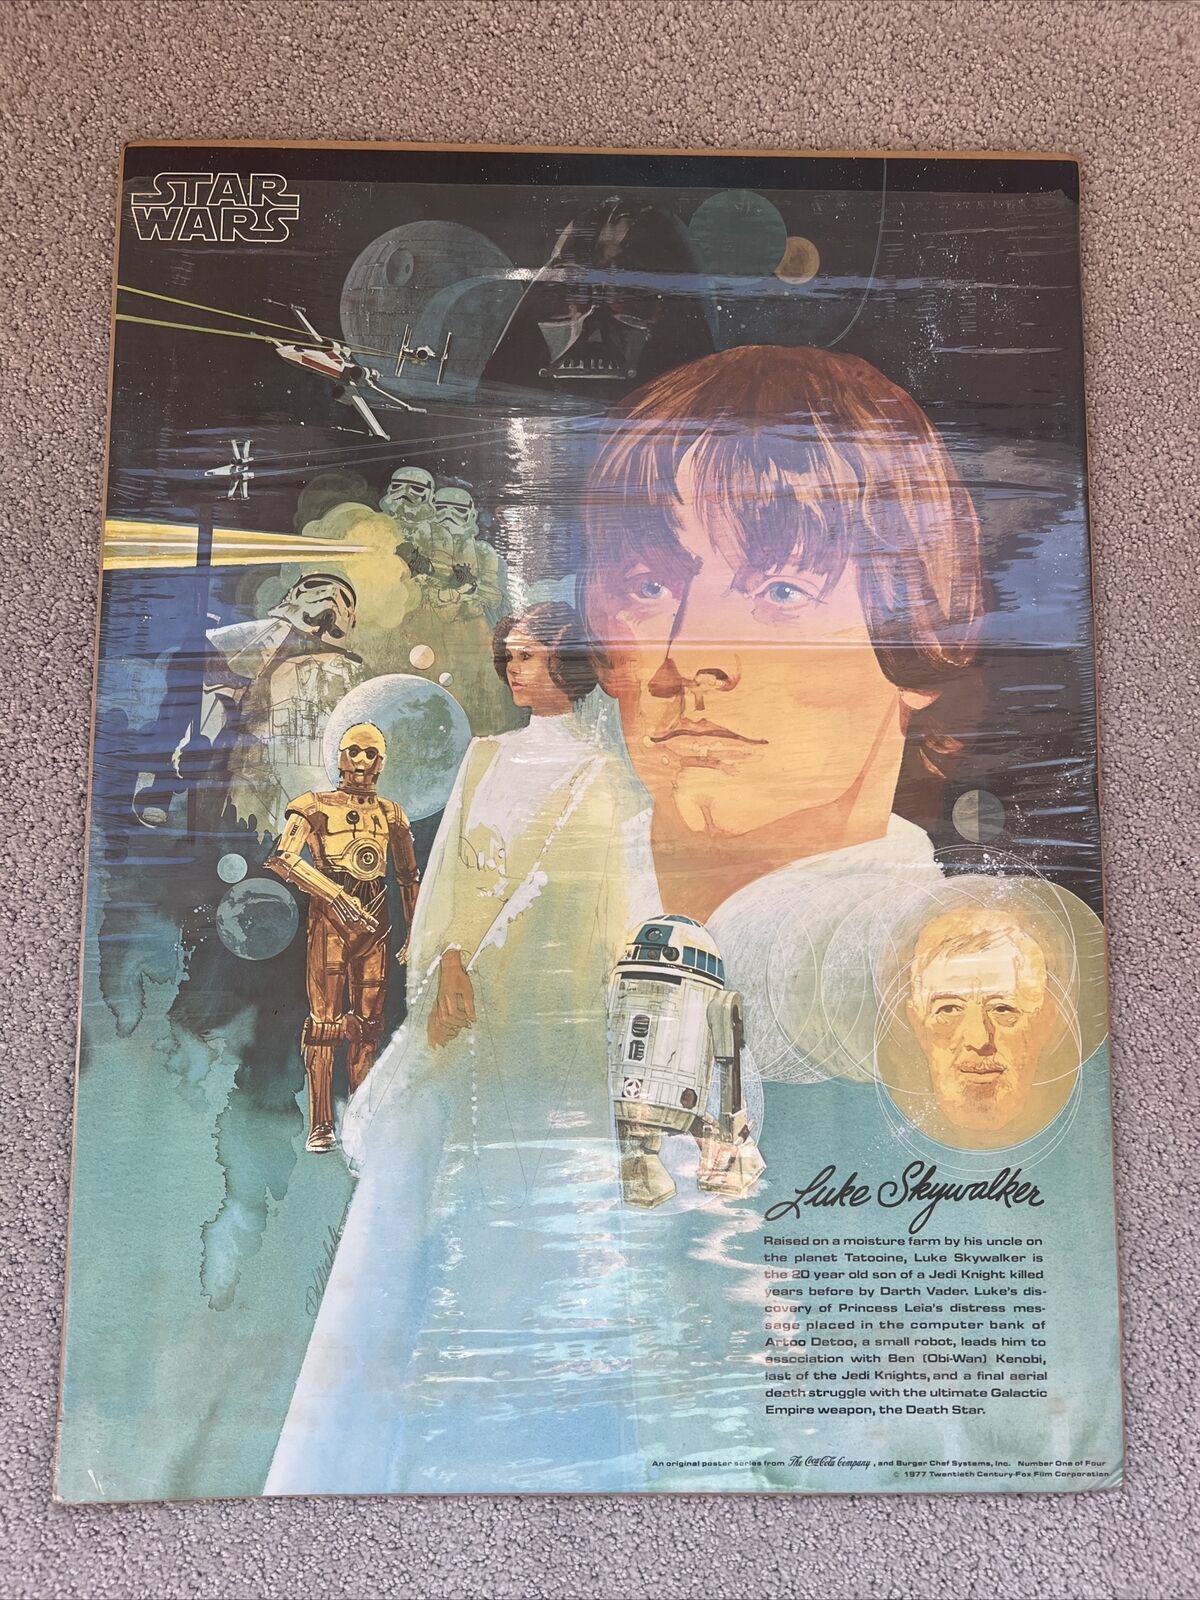 Star Wars Poster 20th Century Fox And Coca Cola Promotion 1977